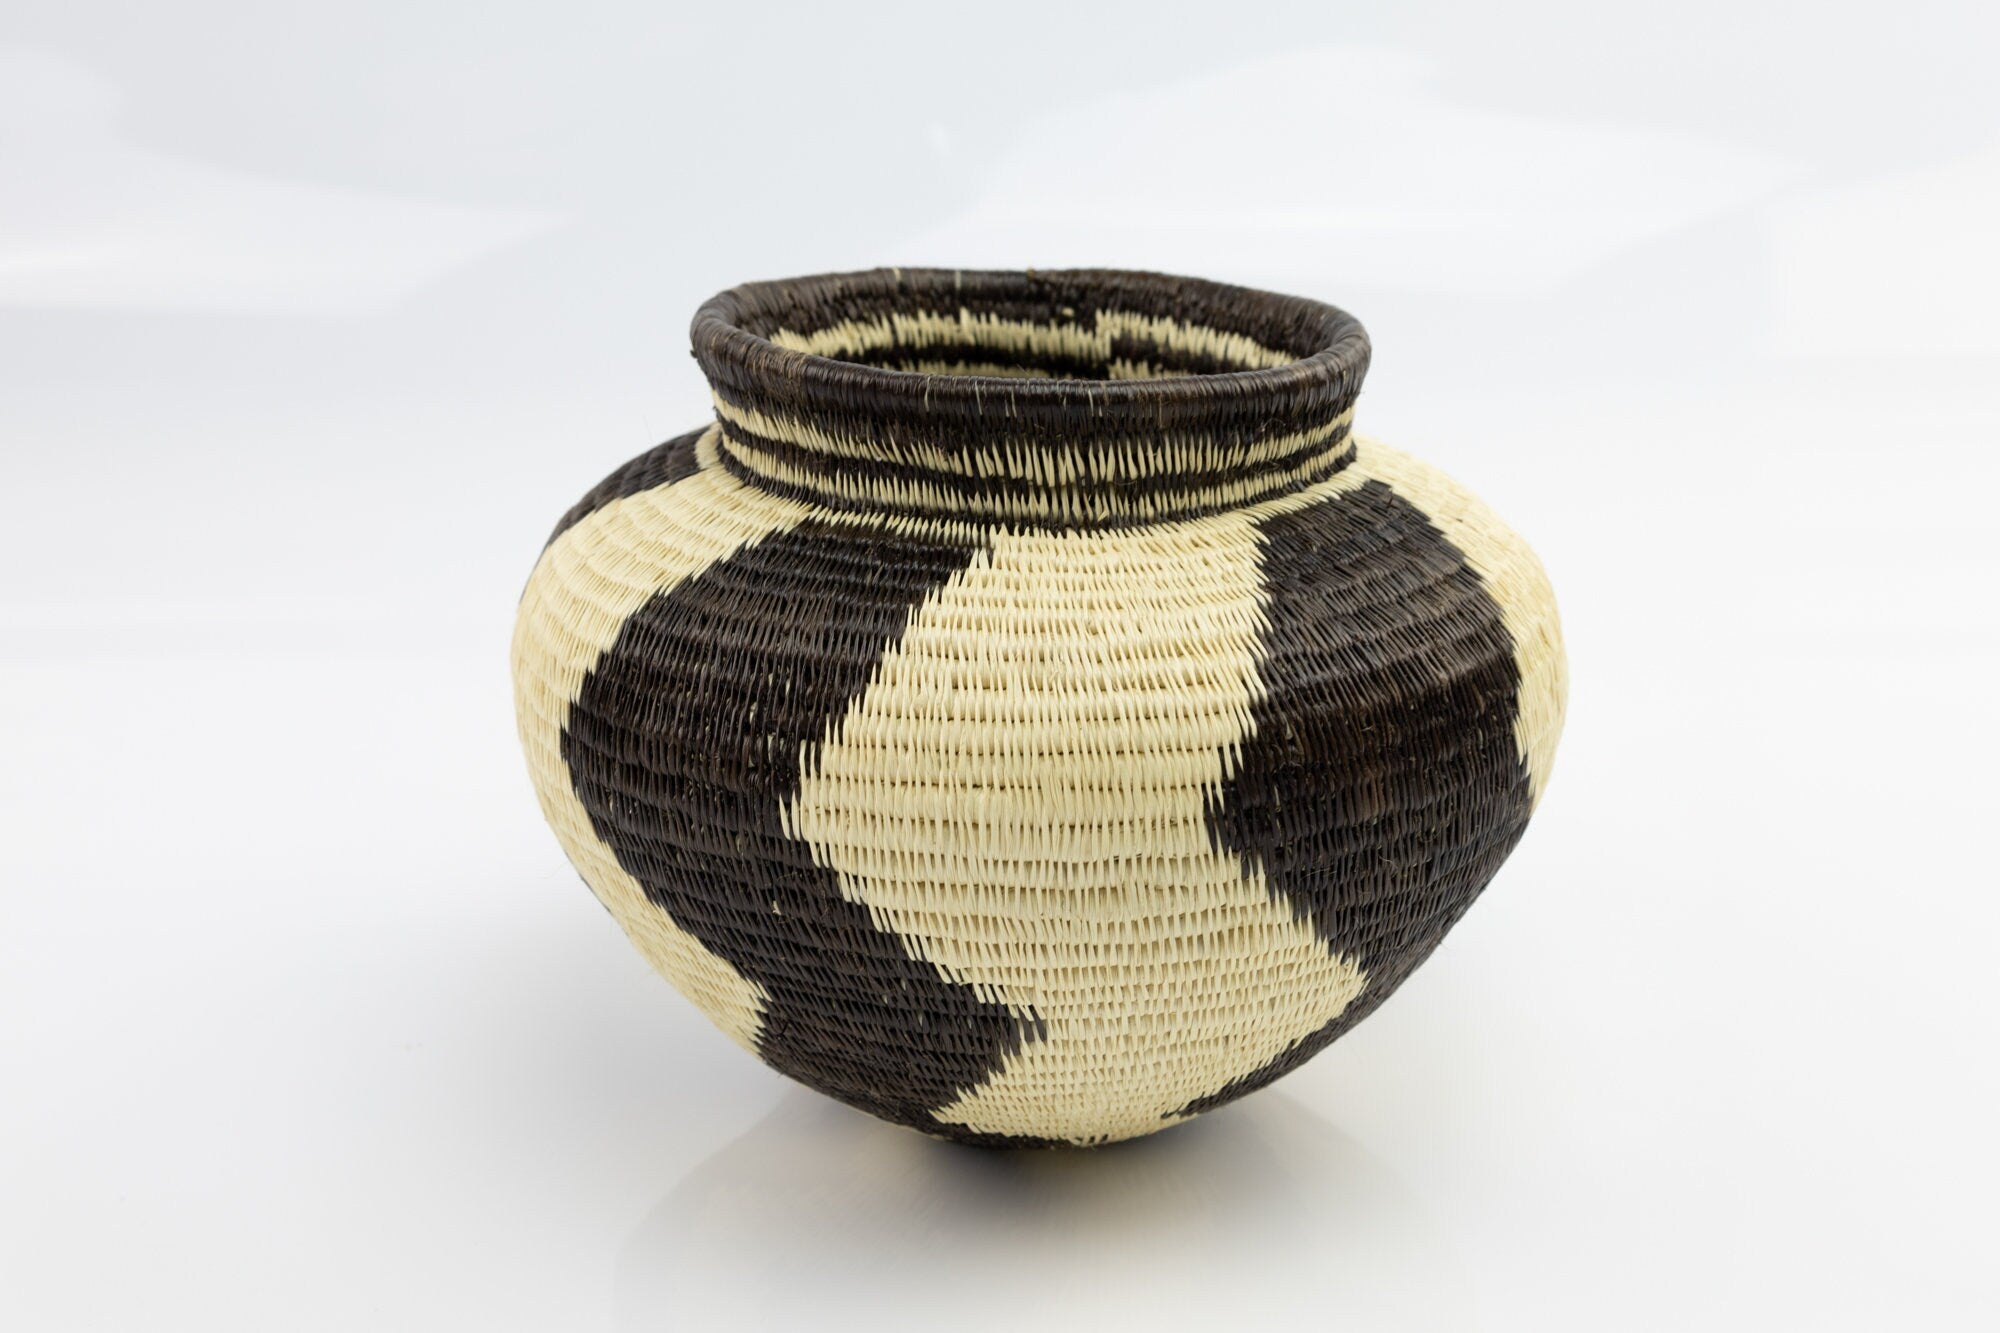 Hand Woven Black and White Basket Made By Wounaan And Emberá Panama Indians. Bowl Basket, Woven Basket, Basket Decor, Woven Storage